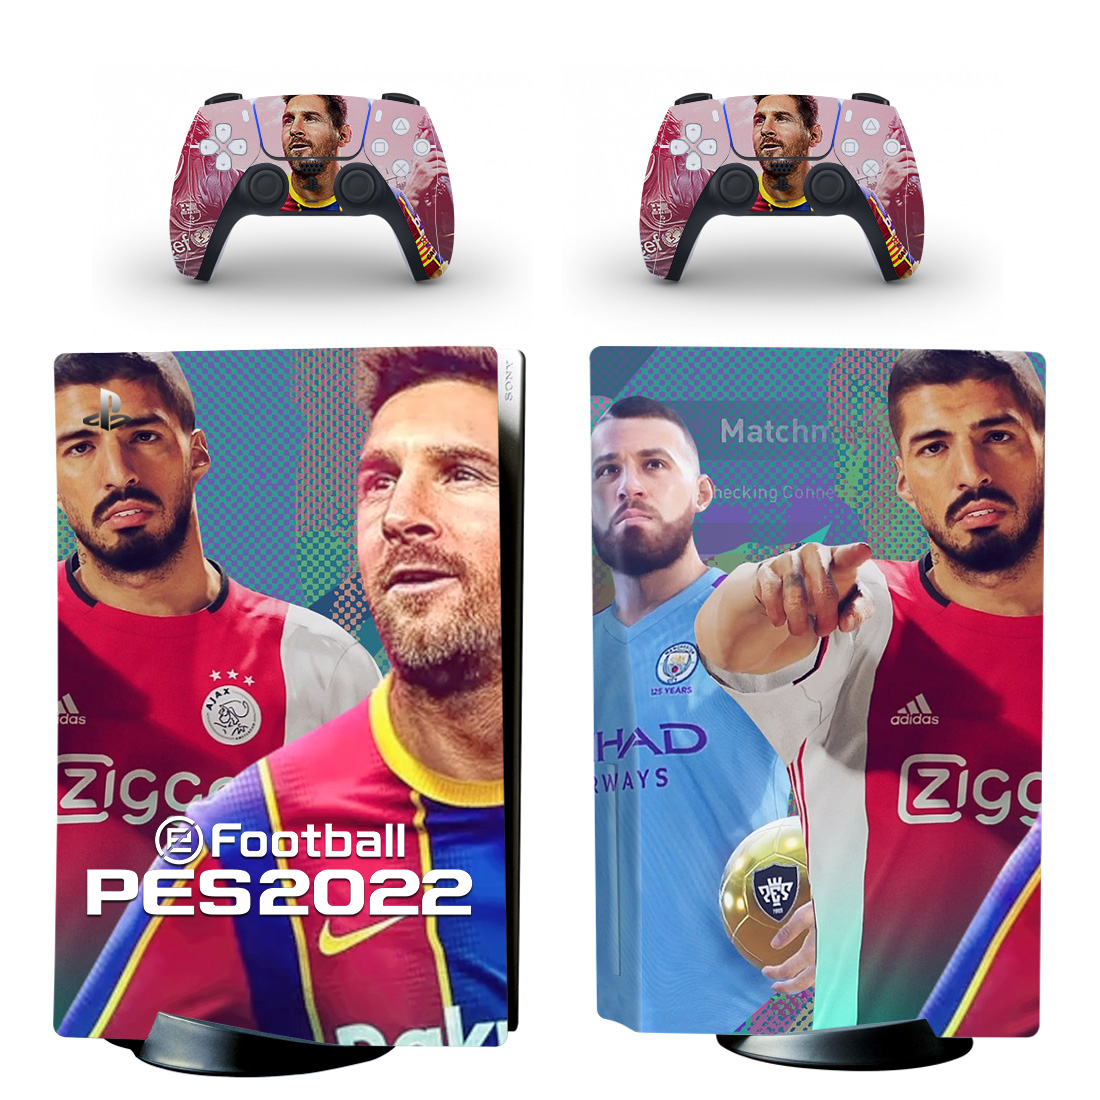 PES 2022 efootball PS5 Skin Sticker Decal